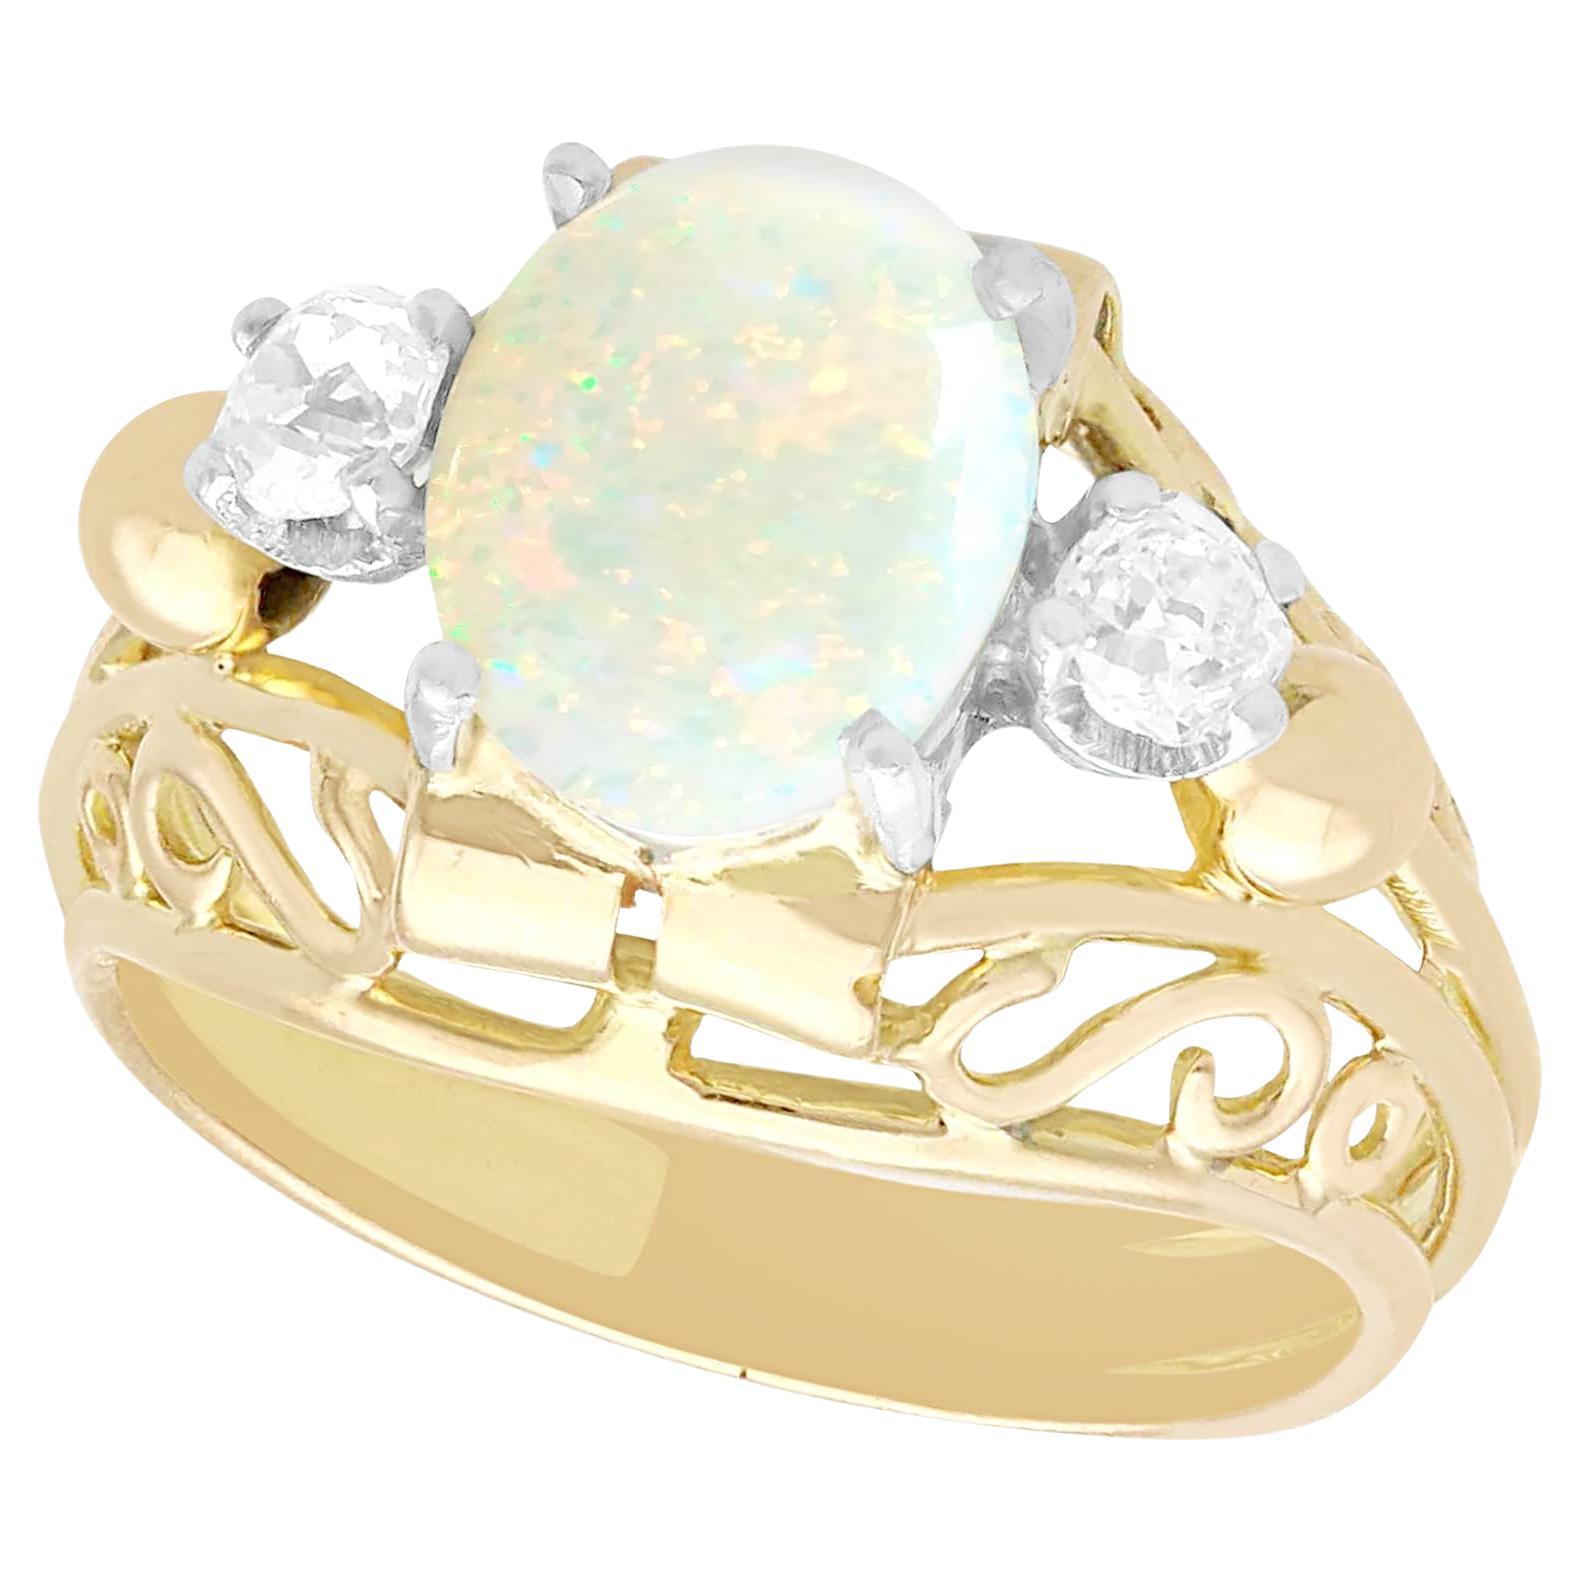 1930s, French, 1.82 Carat Cabochon Cut Opal and Diamond 18K Yellow Gold Ring